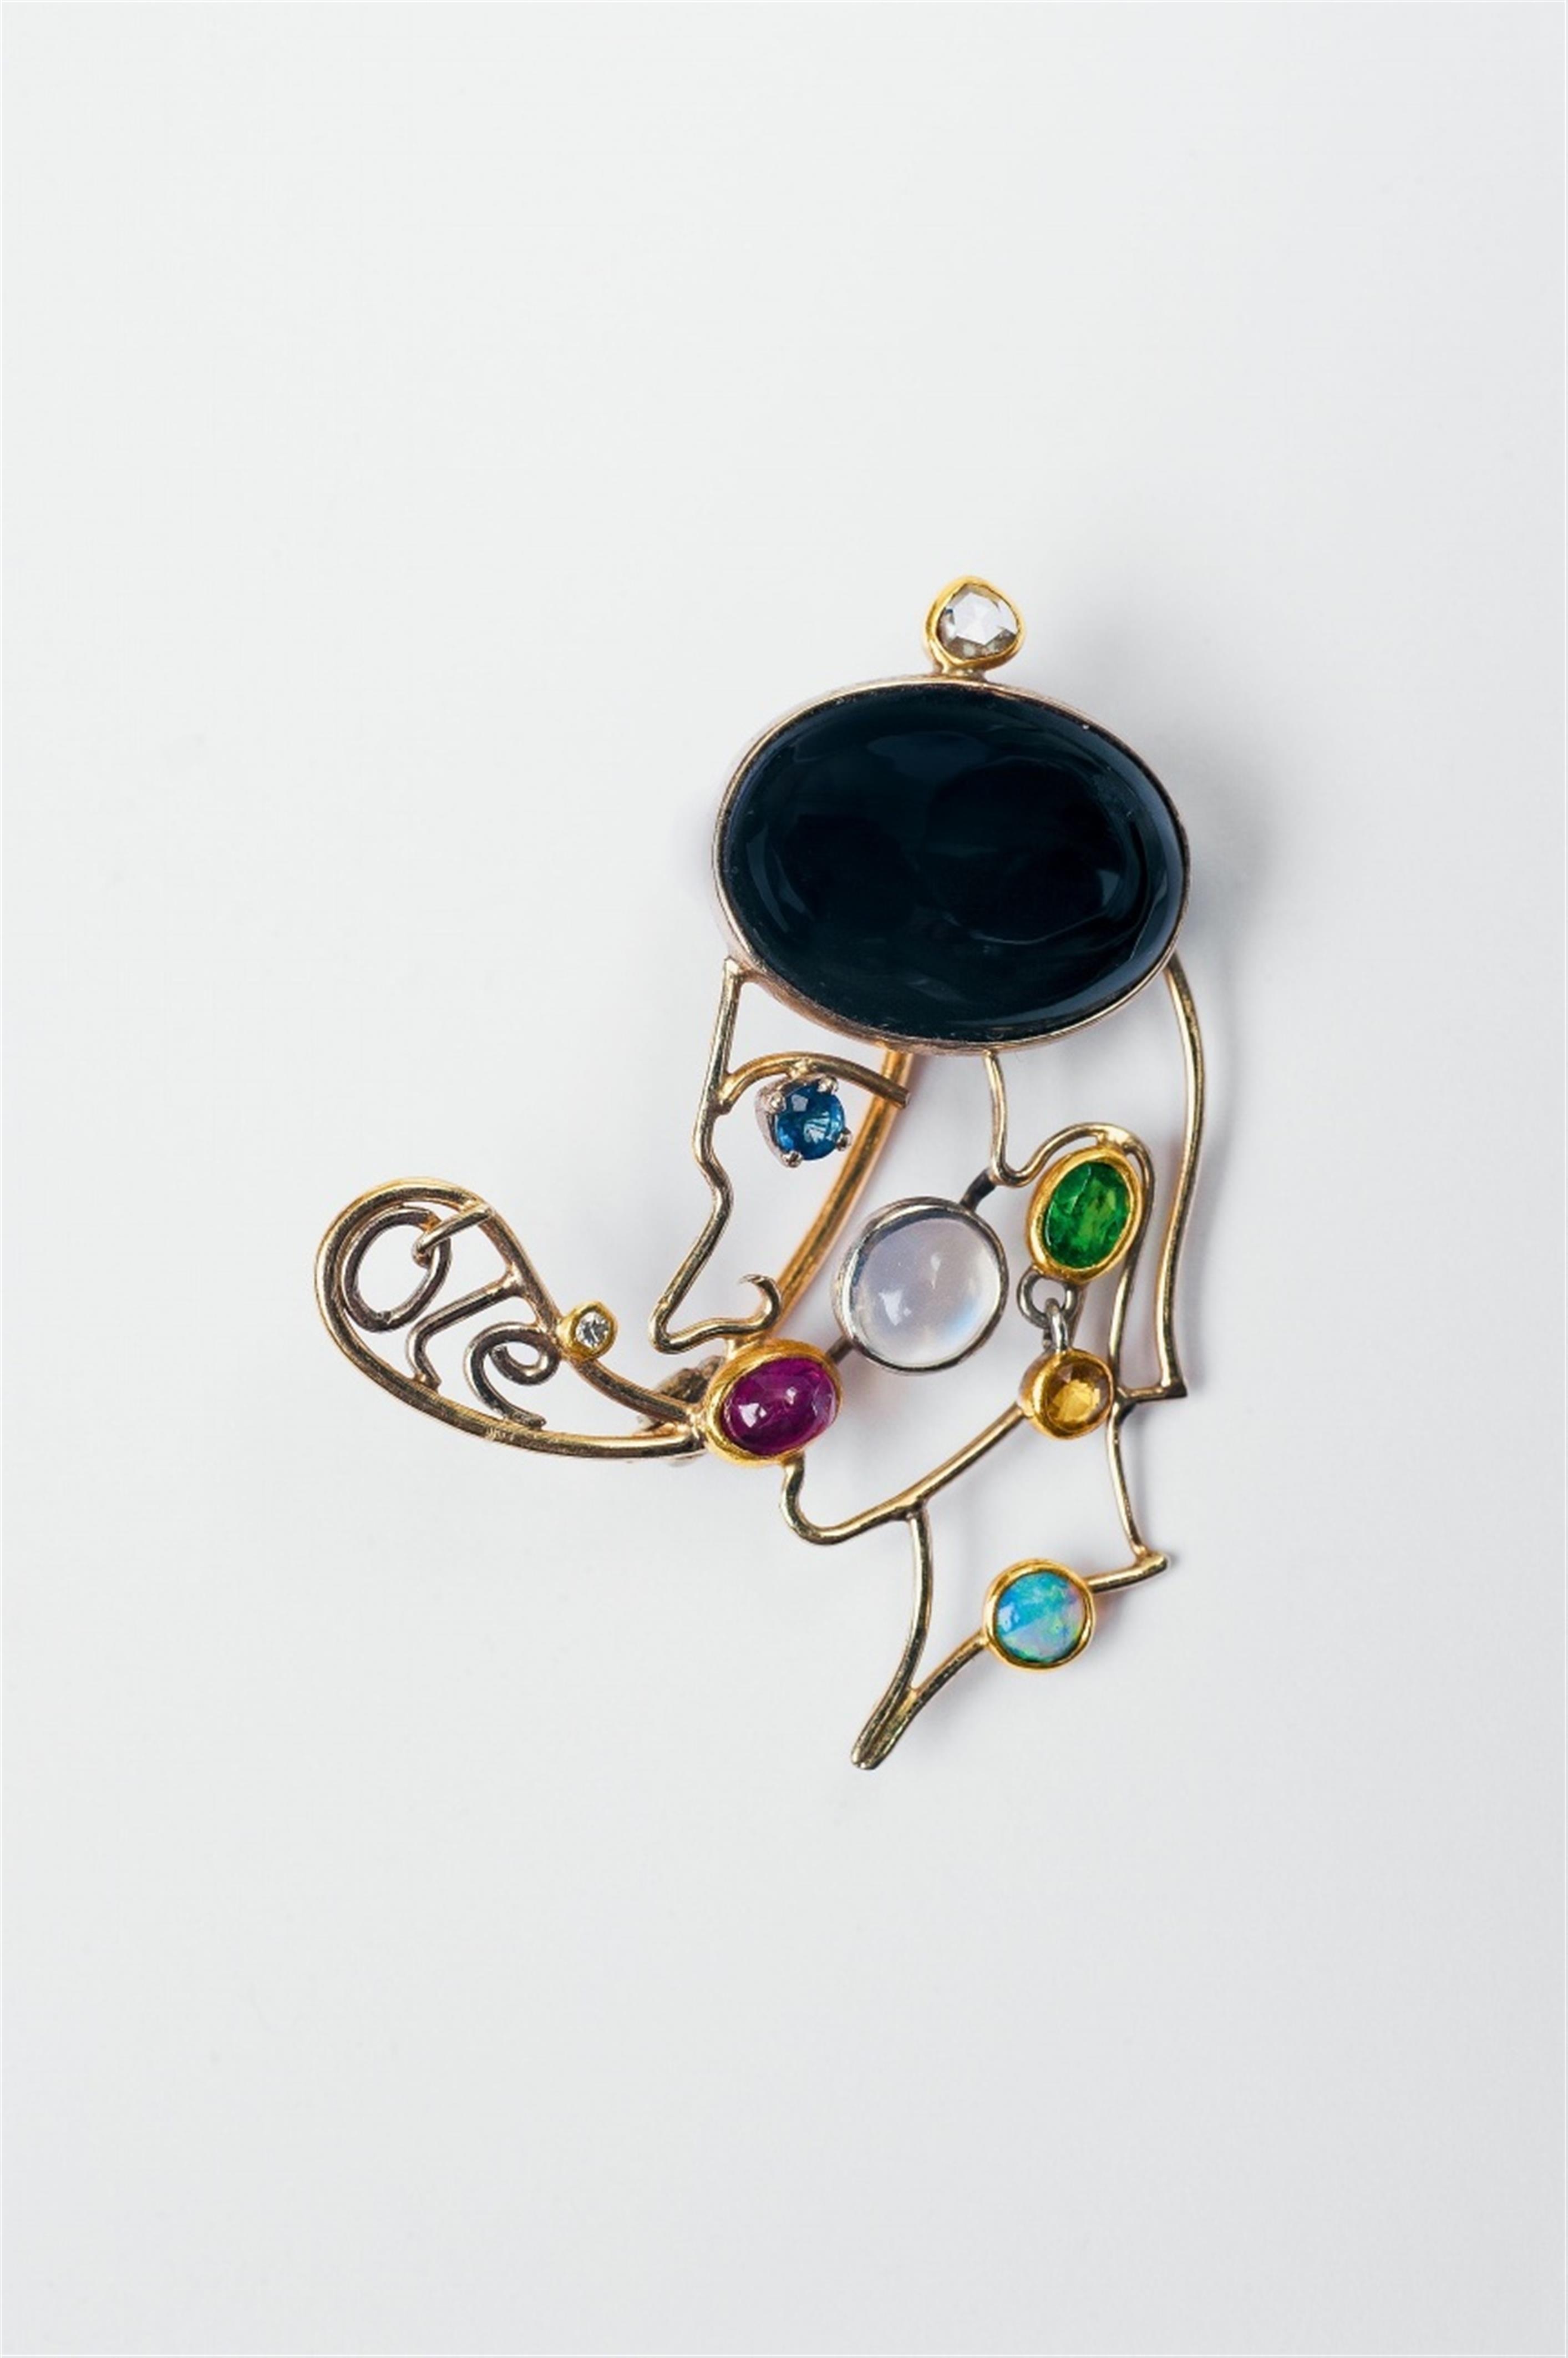 An 18k gold gem-set brooch of a male head with speech bubble by Falko Marx, Cologne - image-1